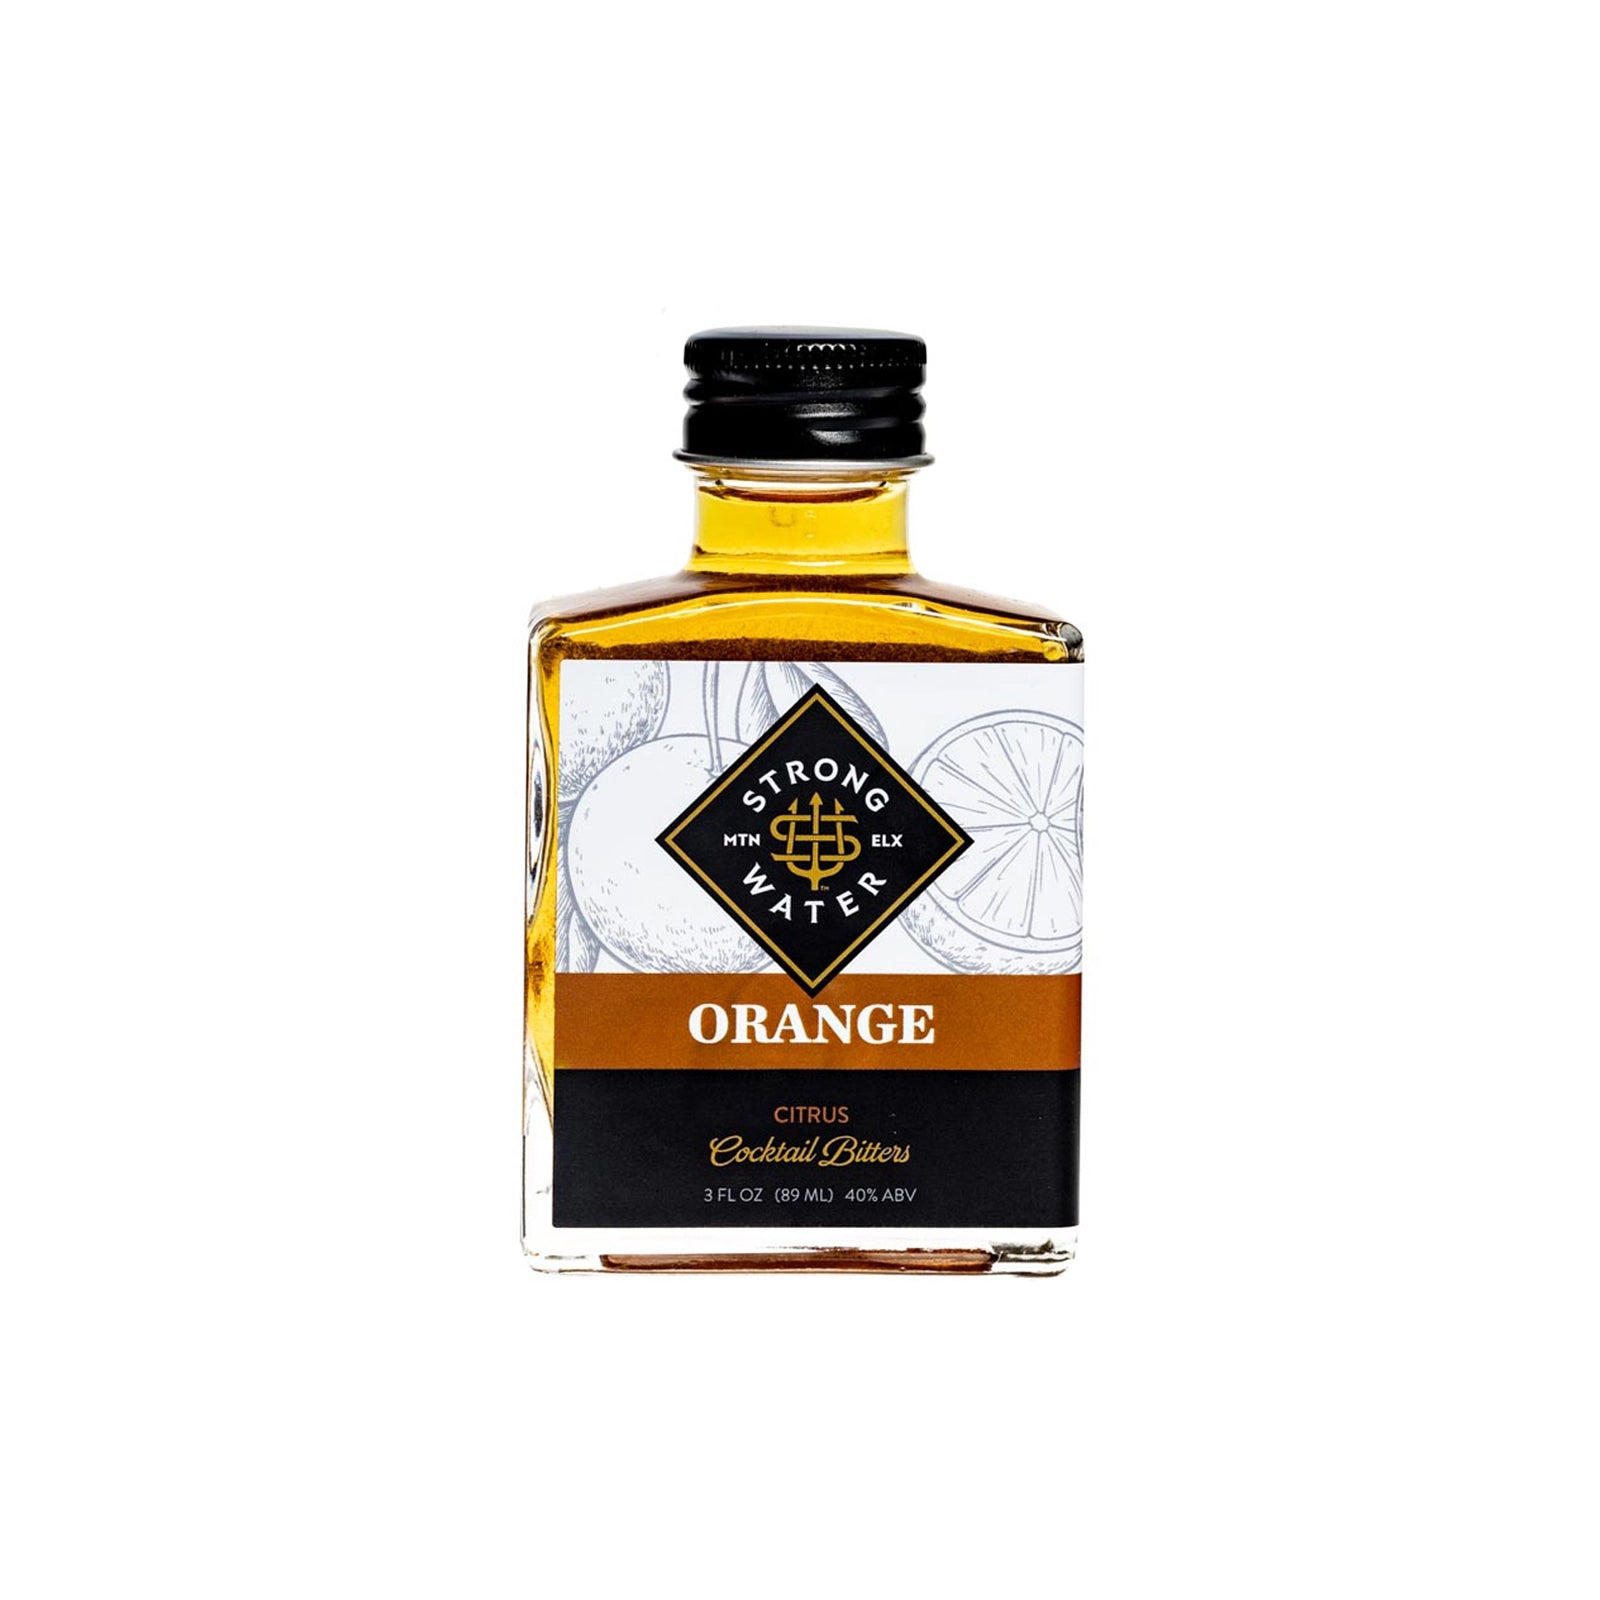 Old Fashioned Cocktail Kit Orange - Strongwater